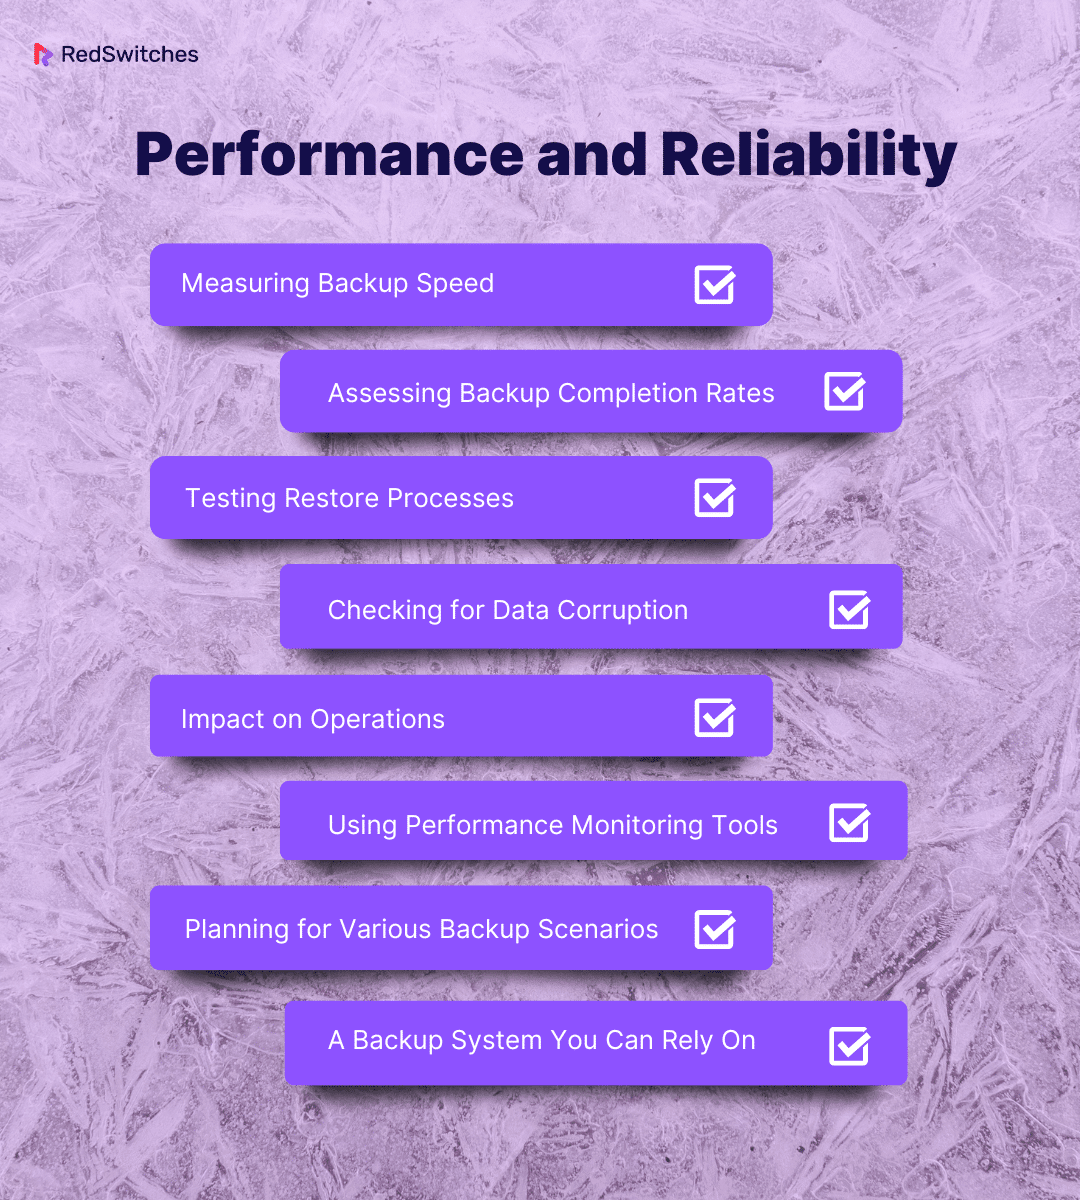 Performance and Reliability